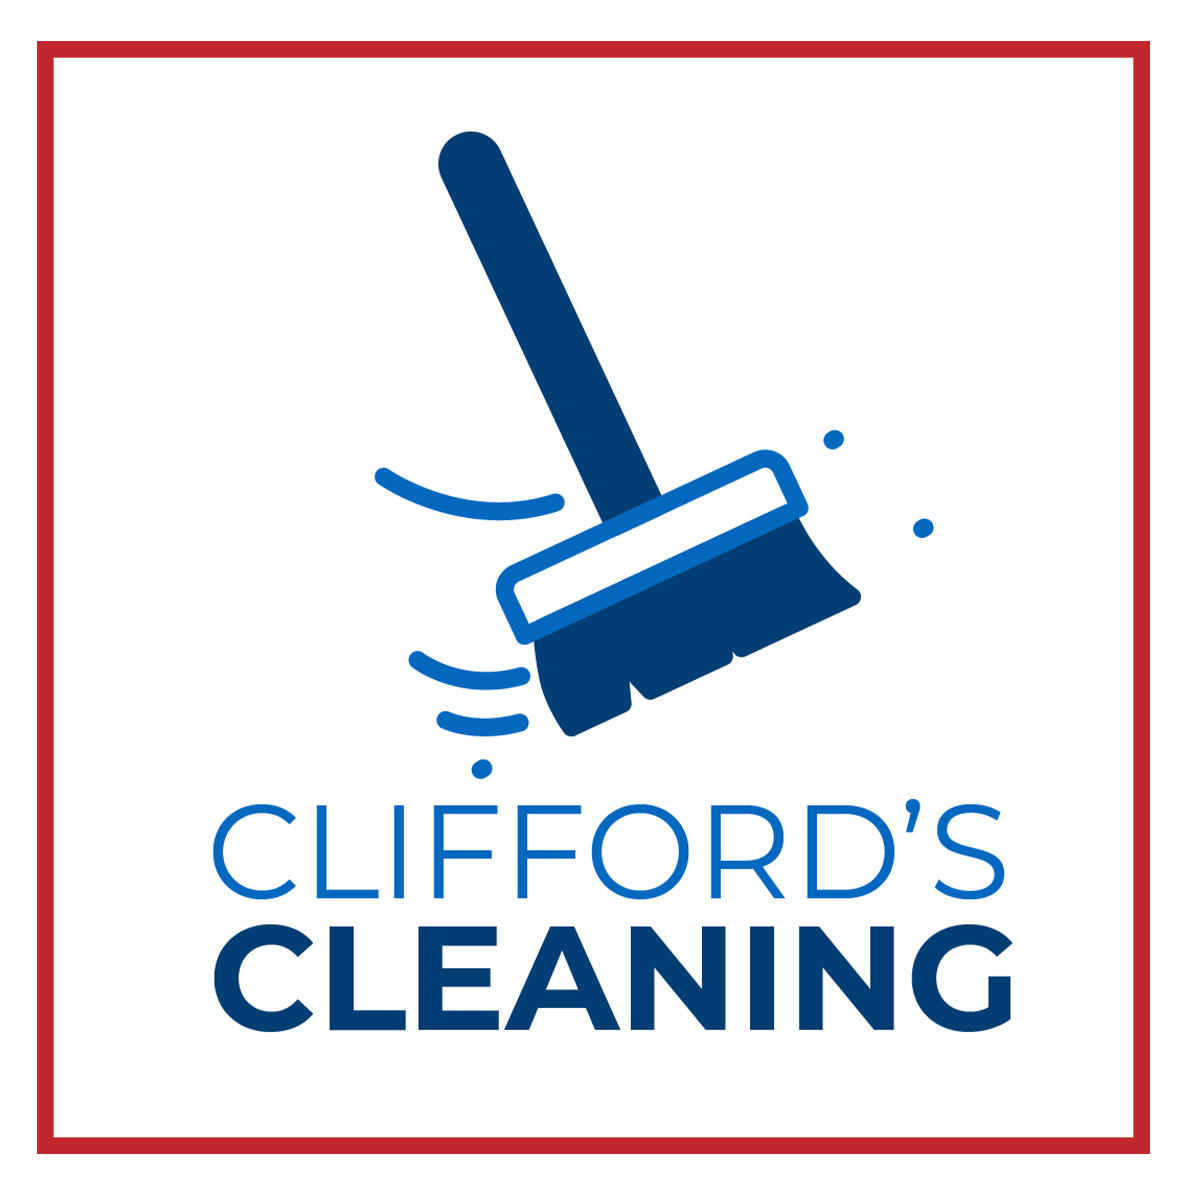 Clifford's Cleaning